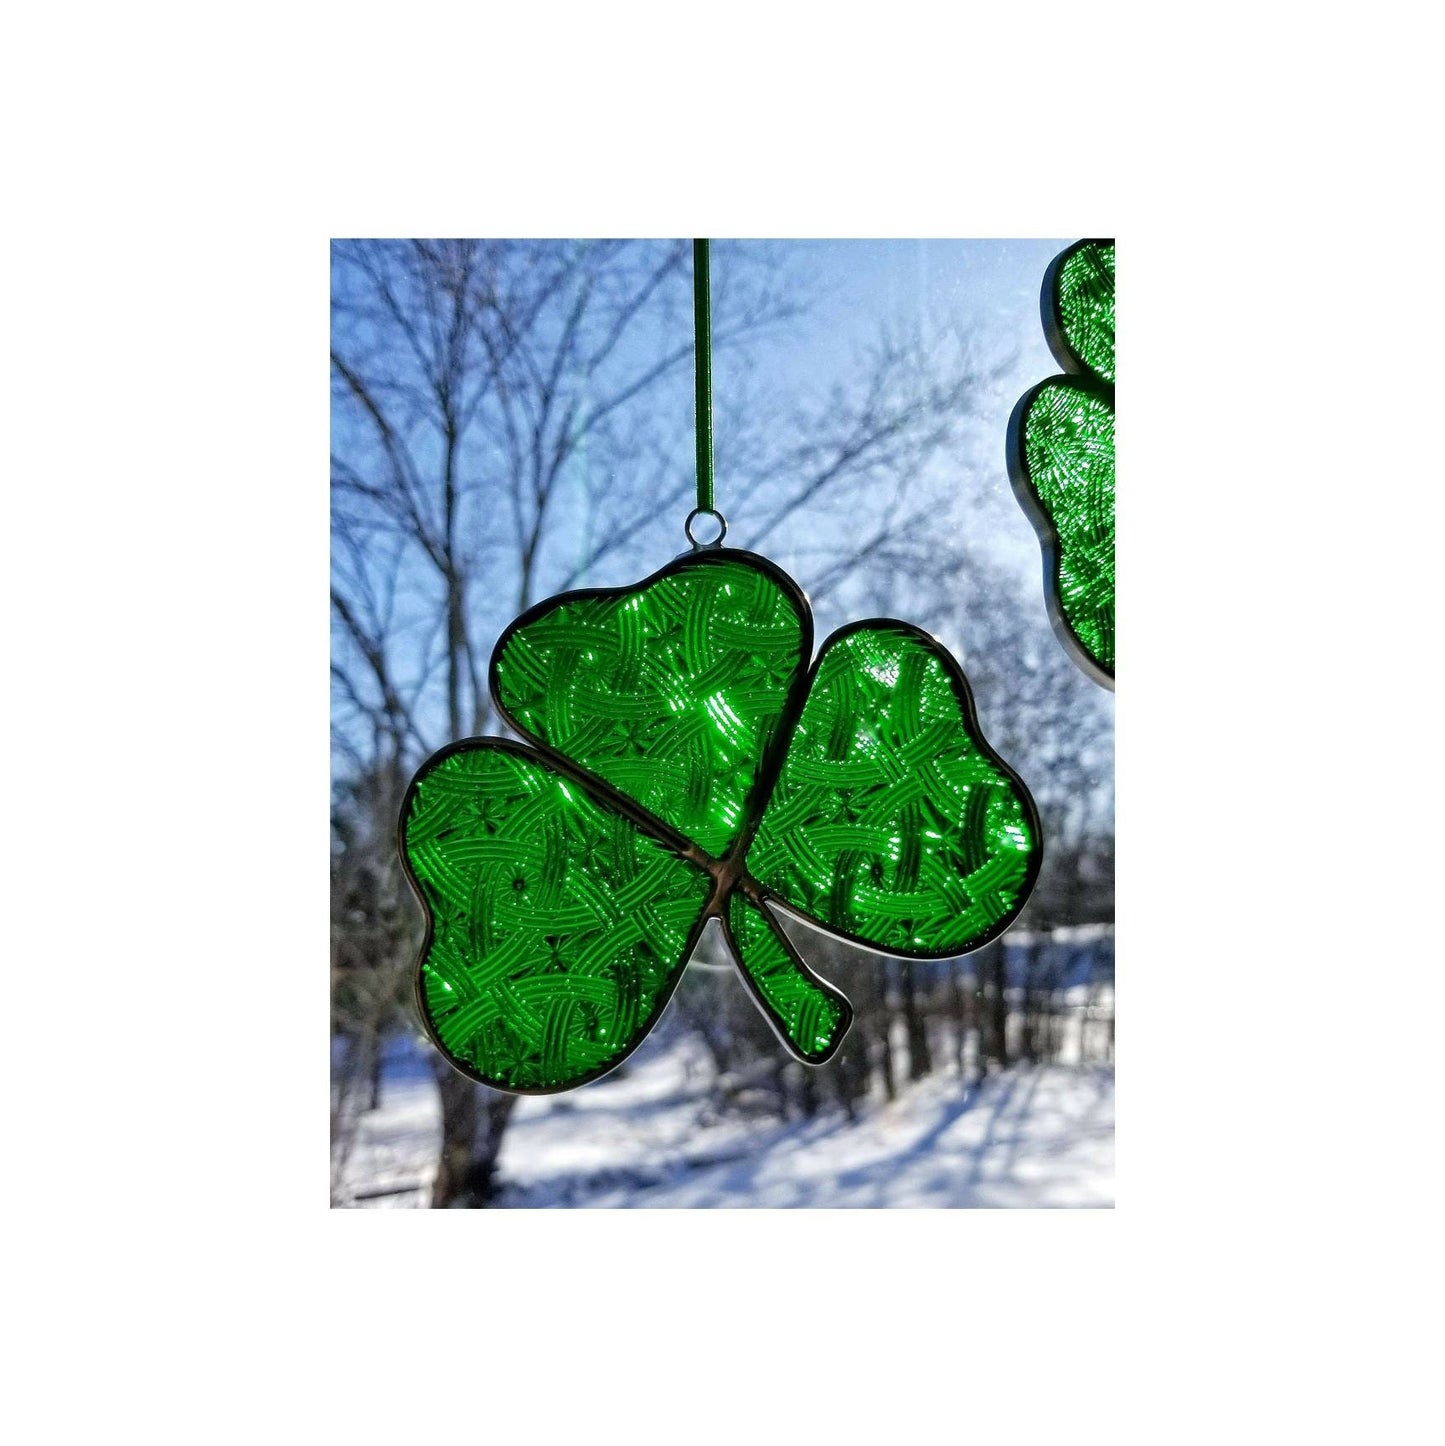 Shamrock Window Hanging, Sparkly Green Glass with Repeating Celtic Knots are Textured into the Stained Glass.